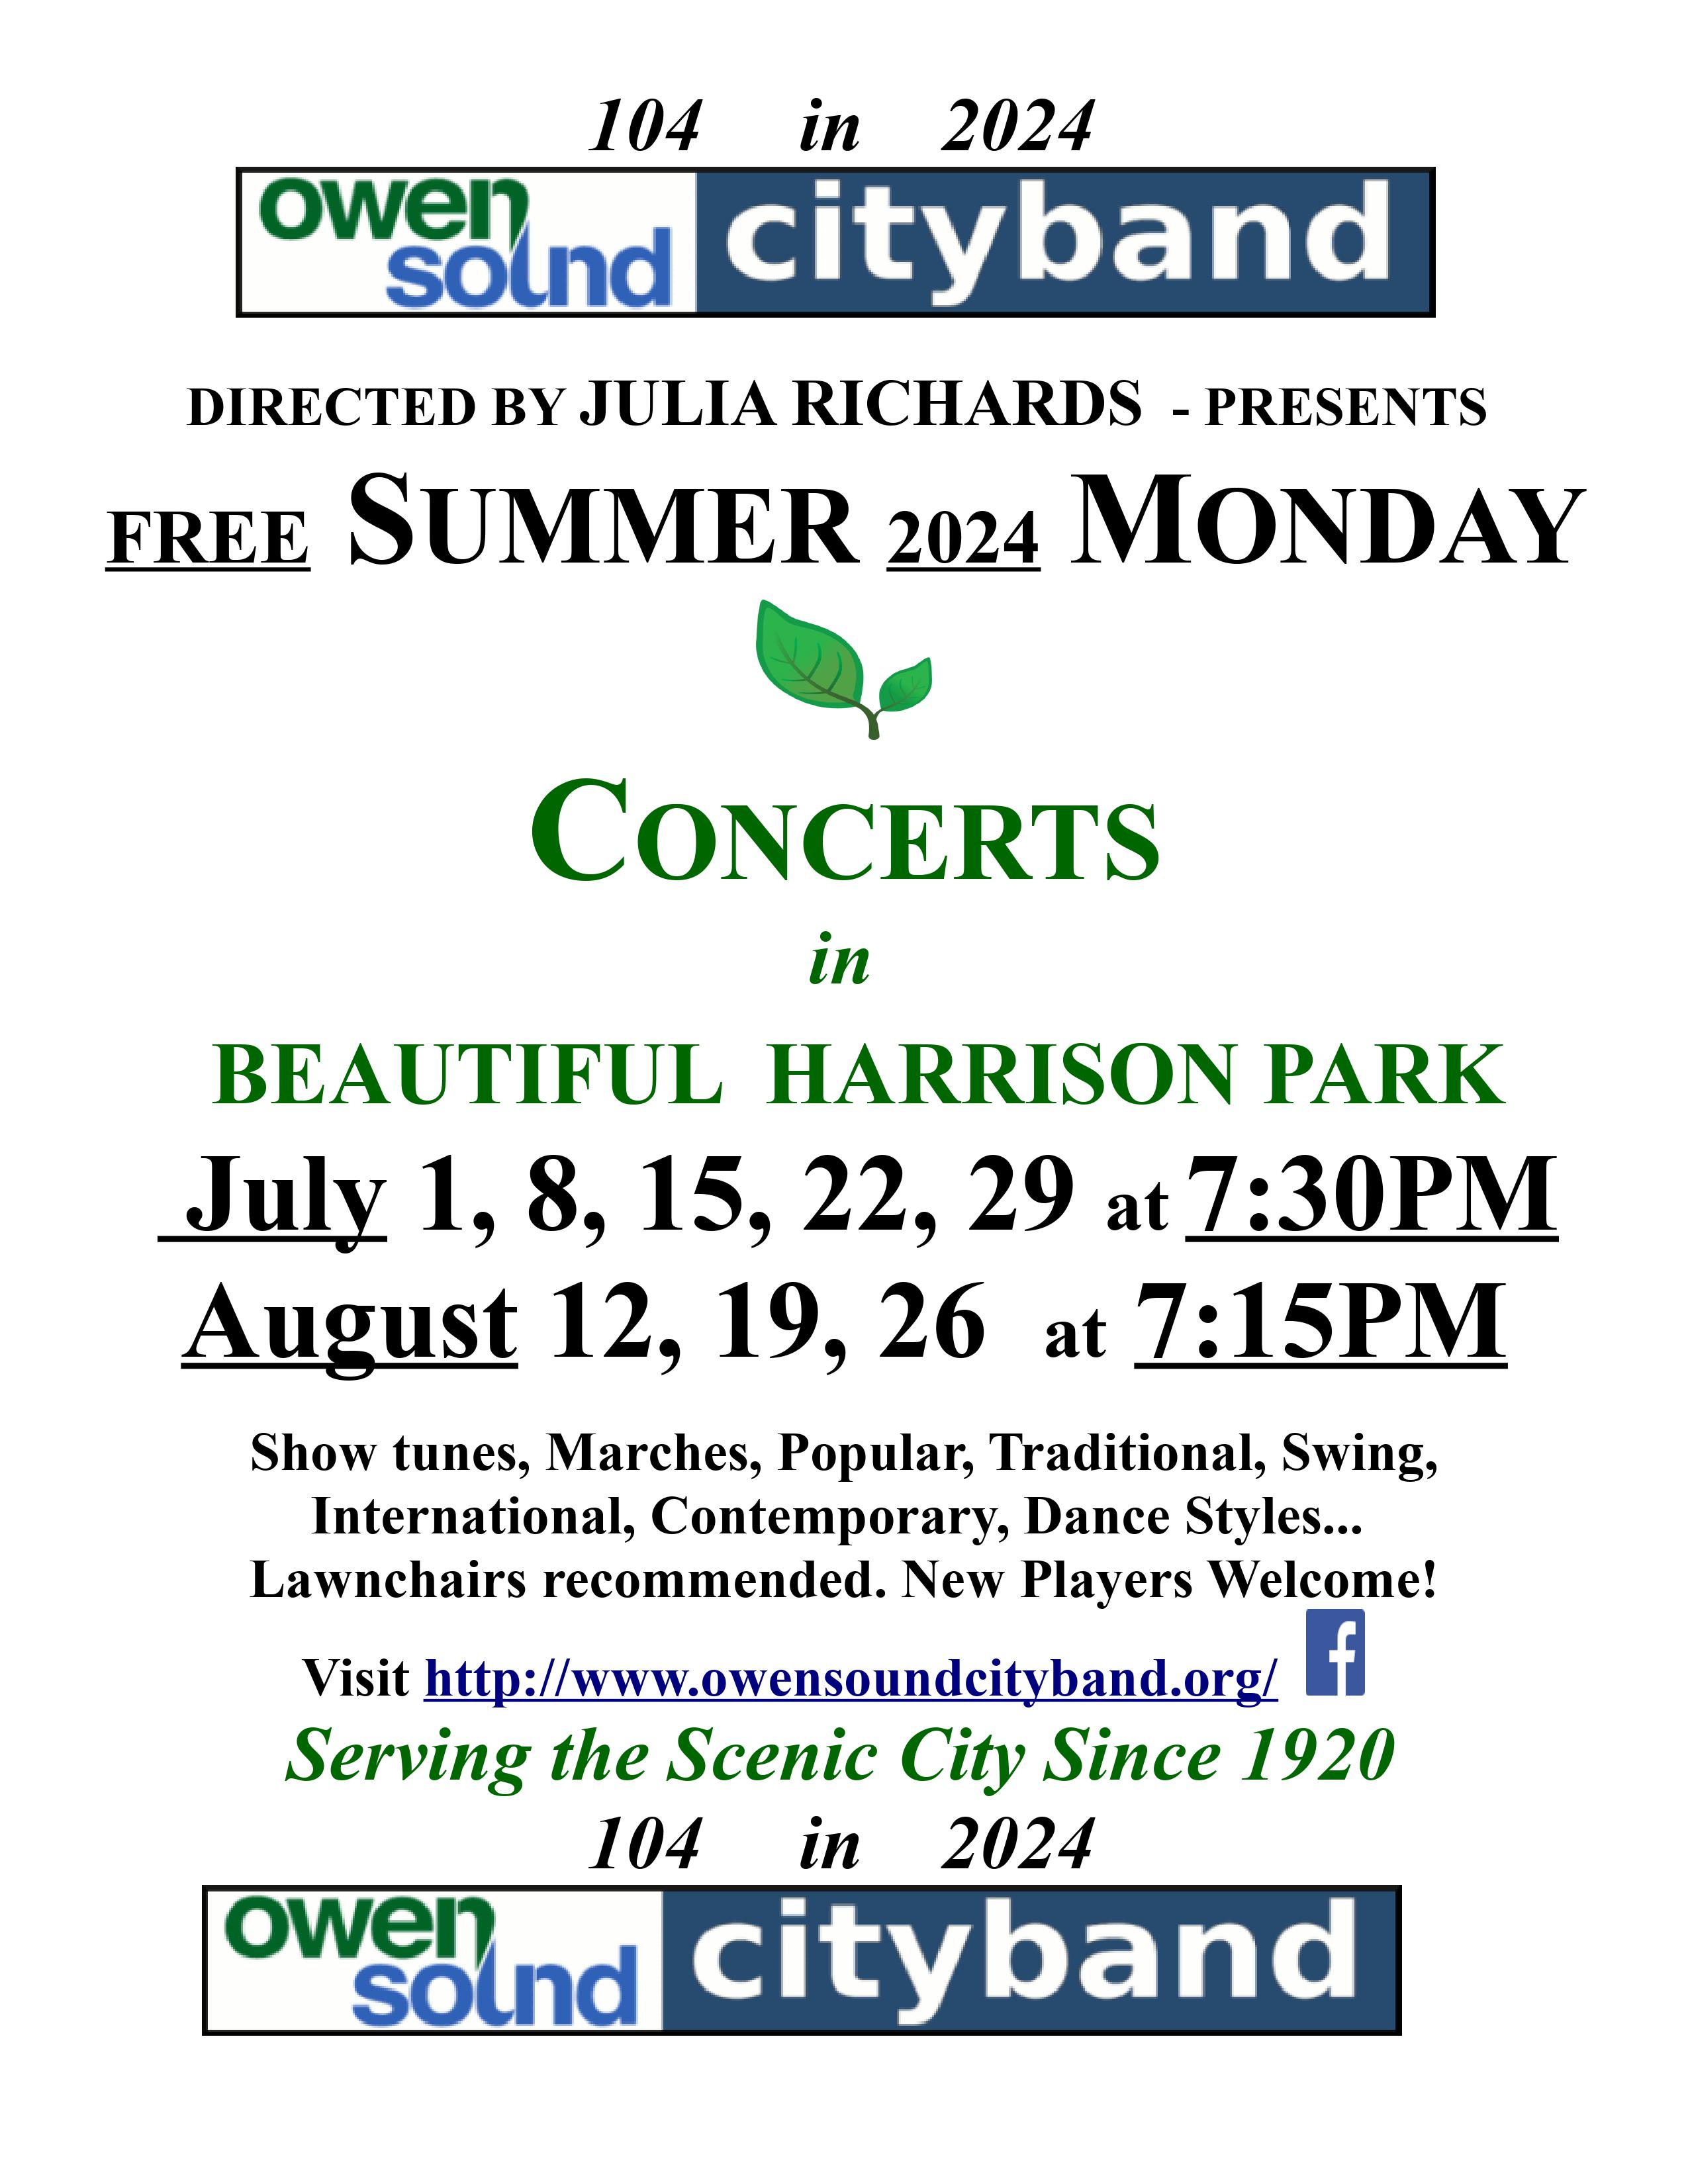 Event image Summer Monday Concerts in the Park